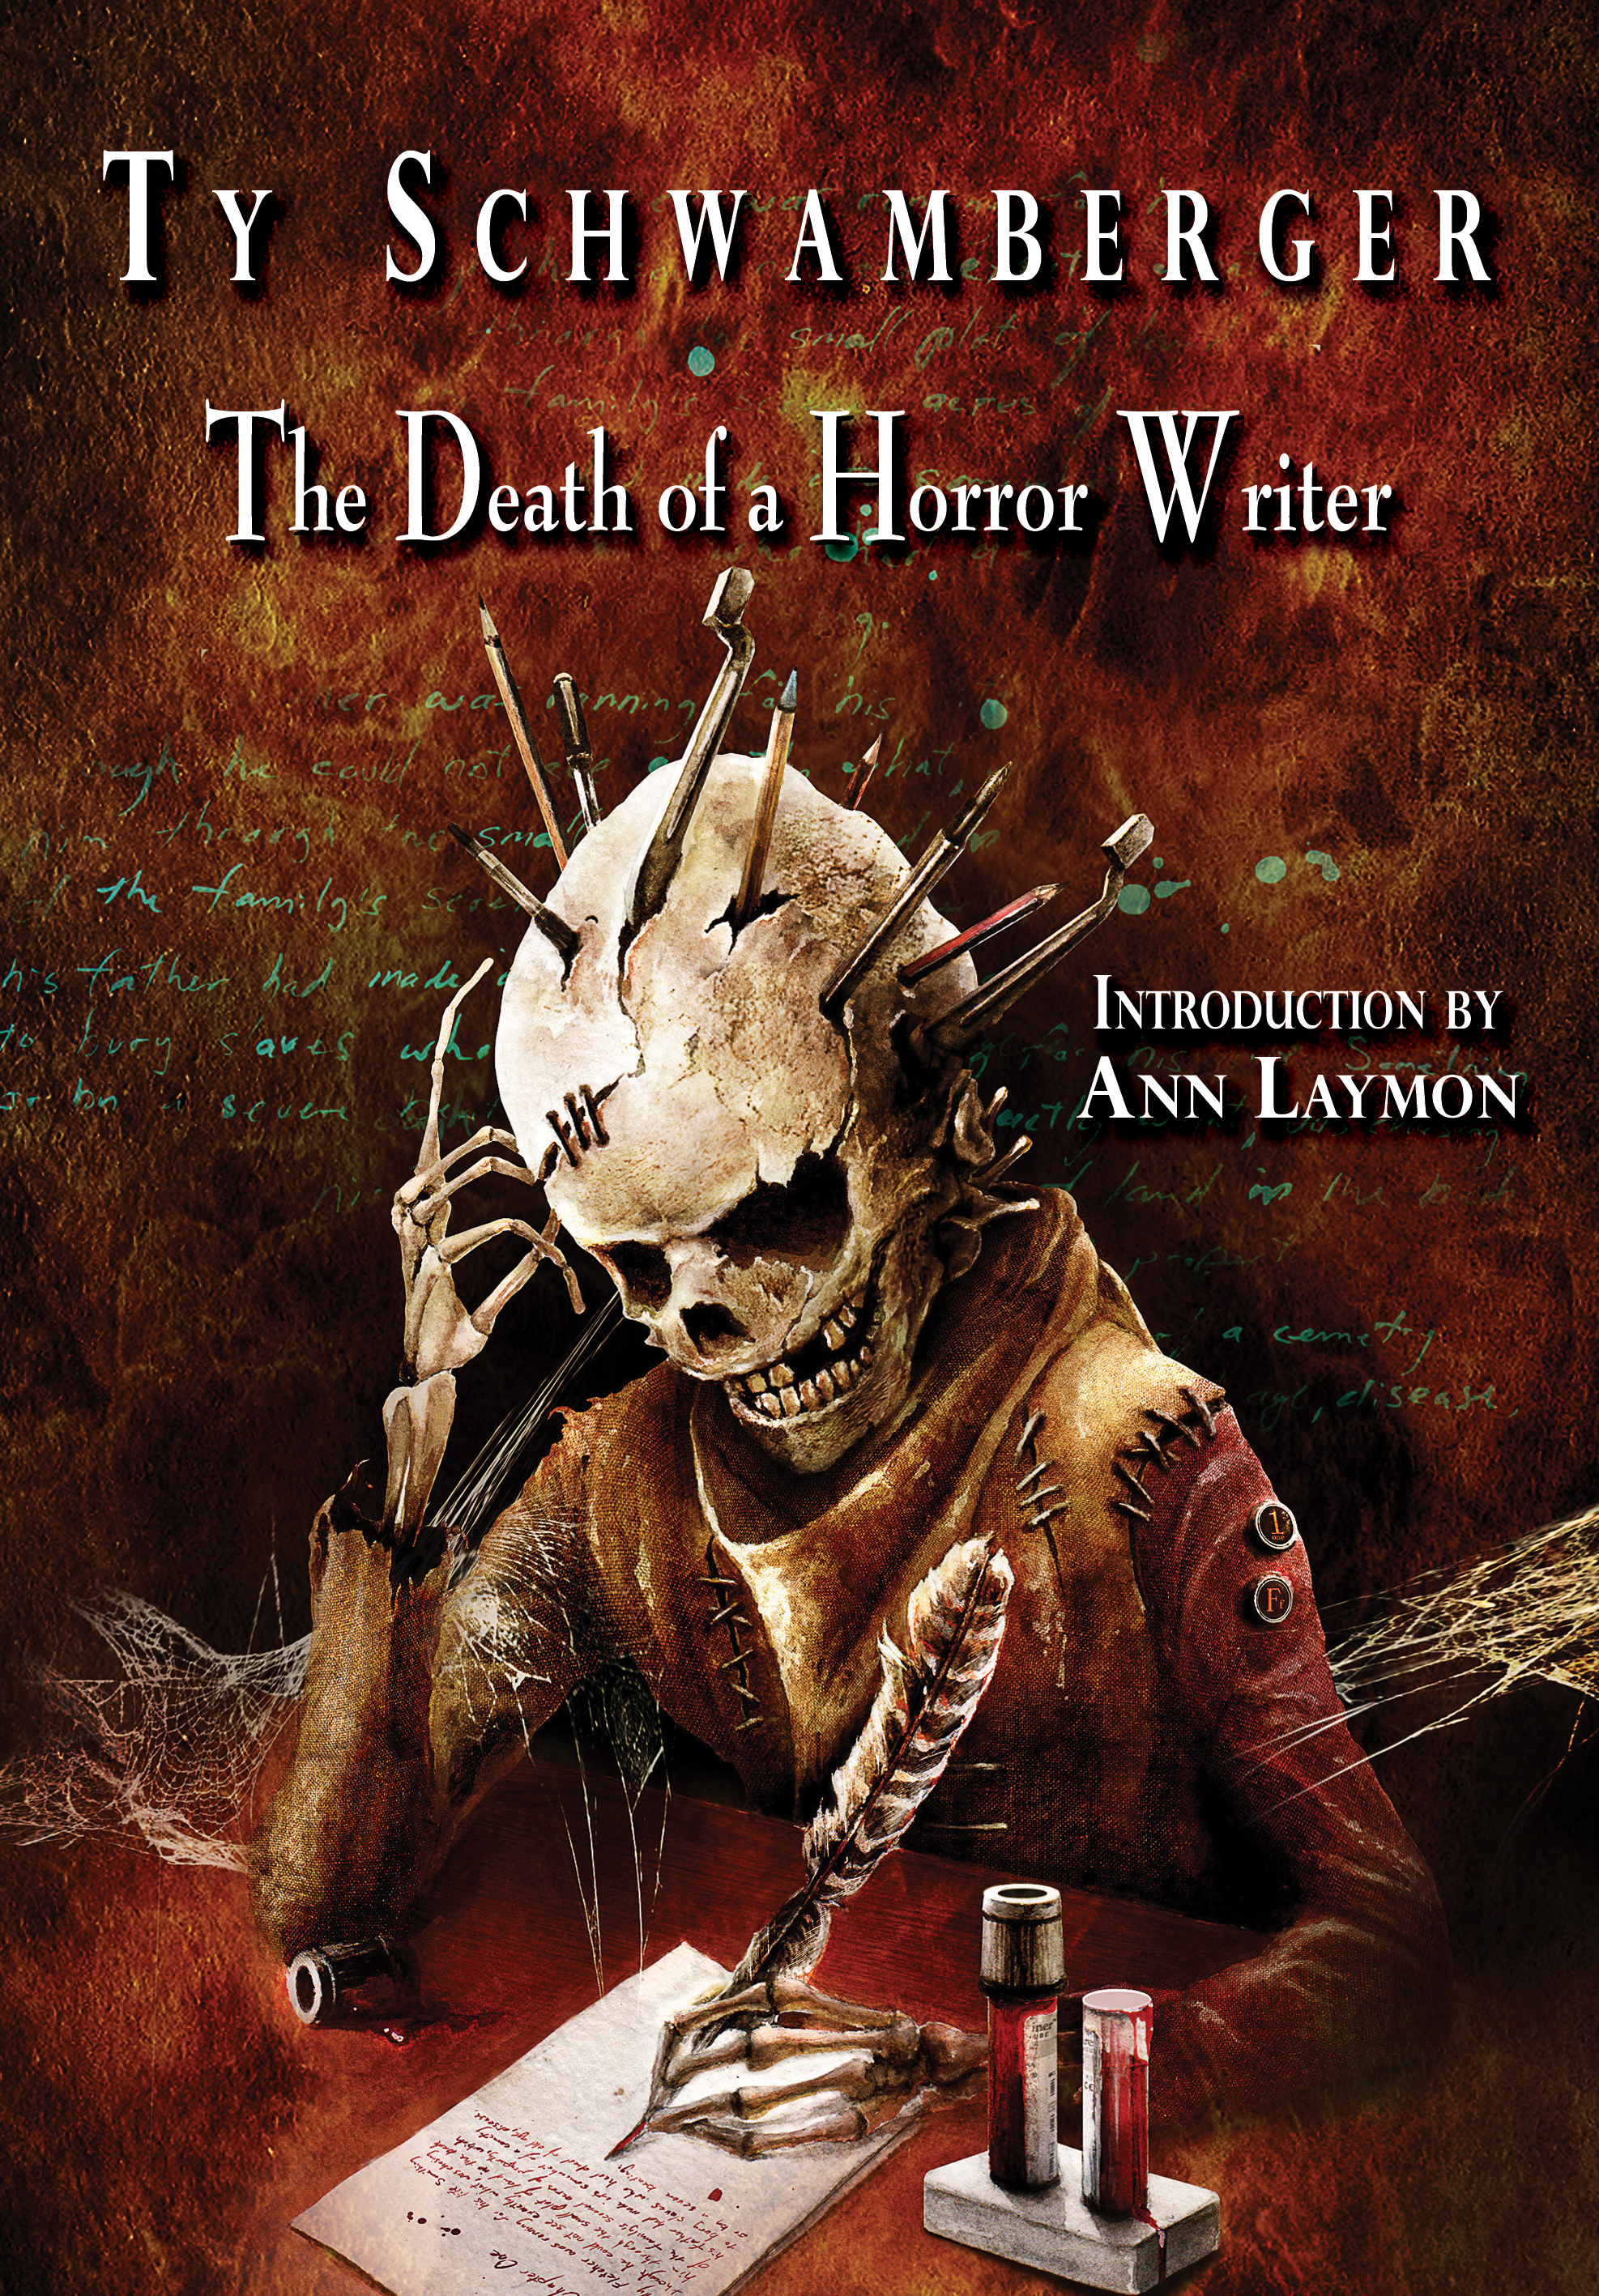 Friday Reads: The Death of a Horror Writer by Ty Schwamberger